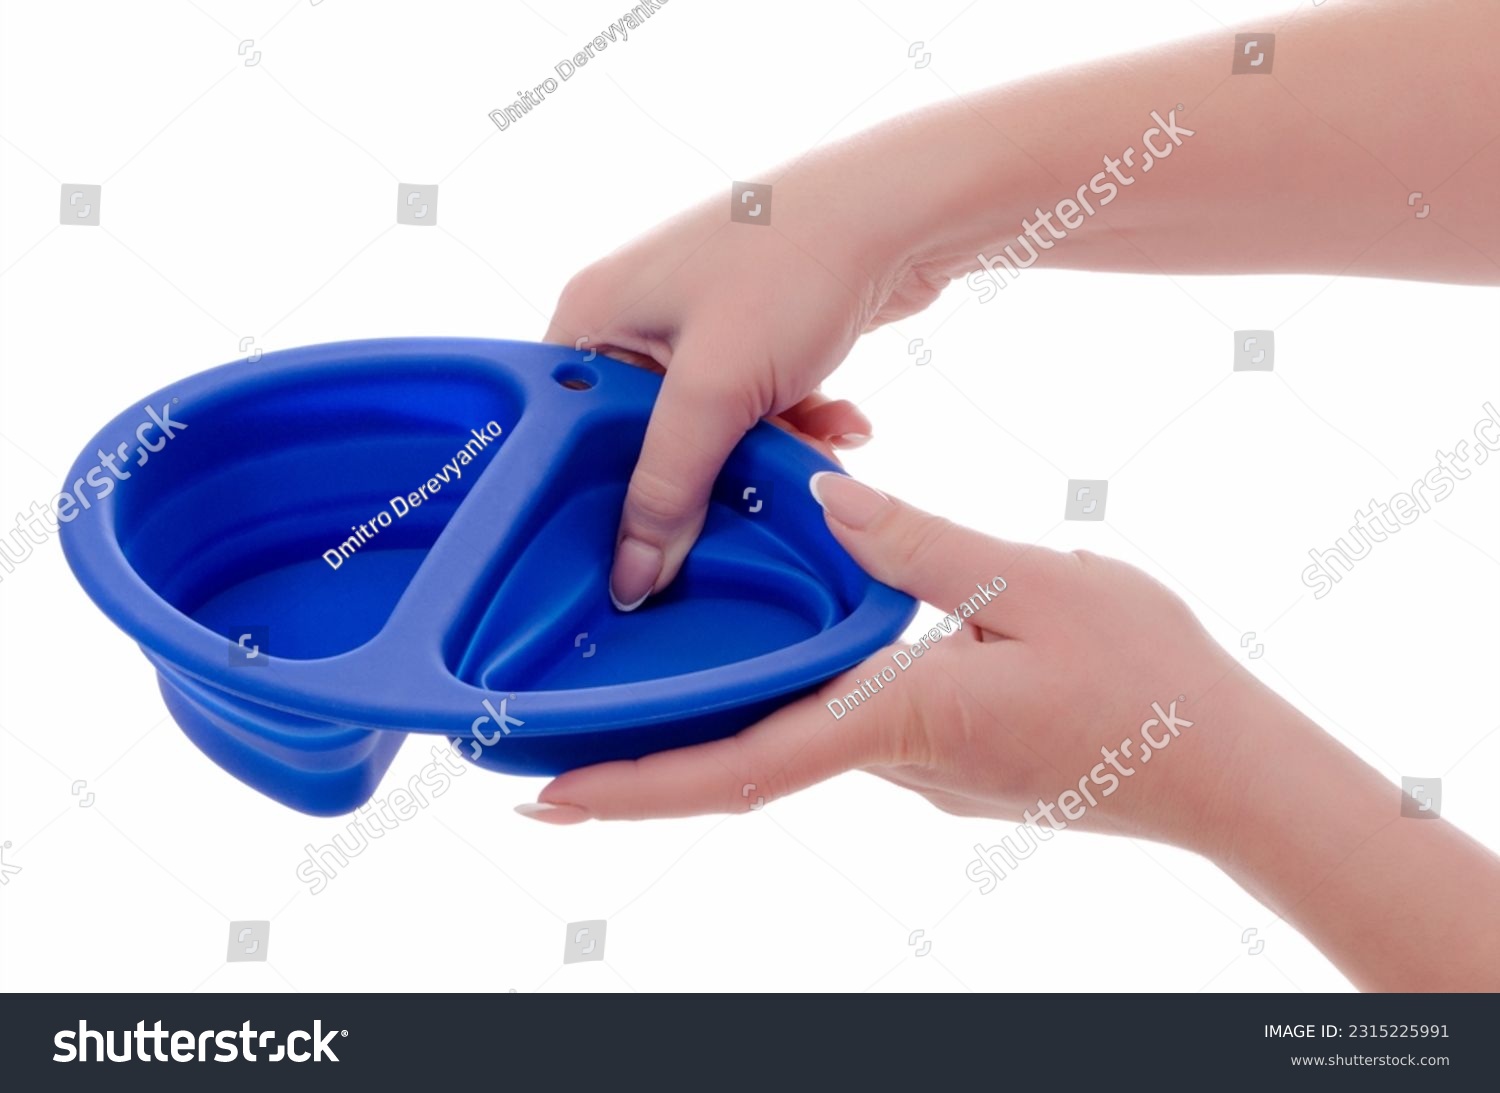 A bowl for feeding dogs or cats in a female hand #2315225991